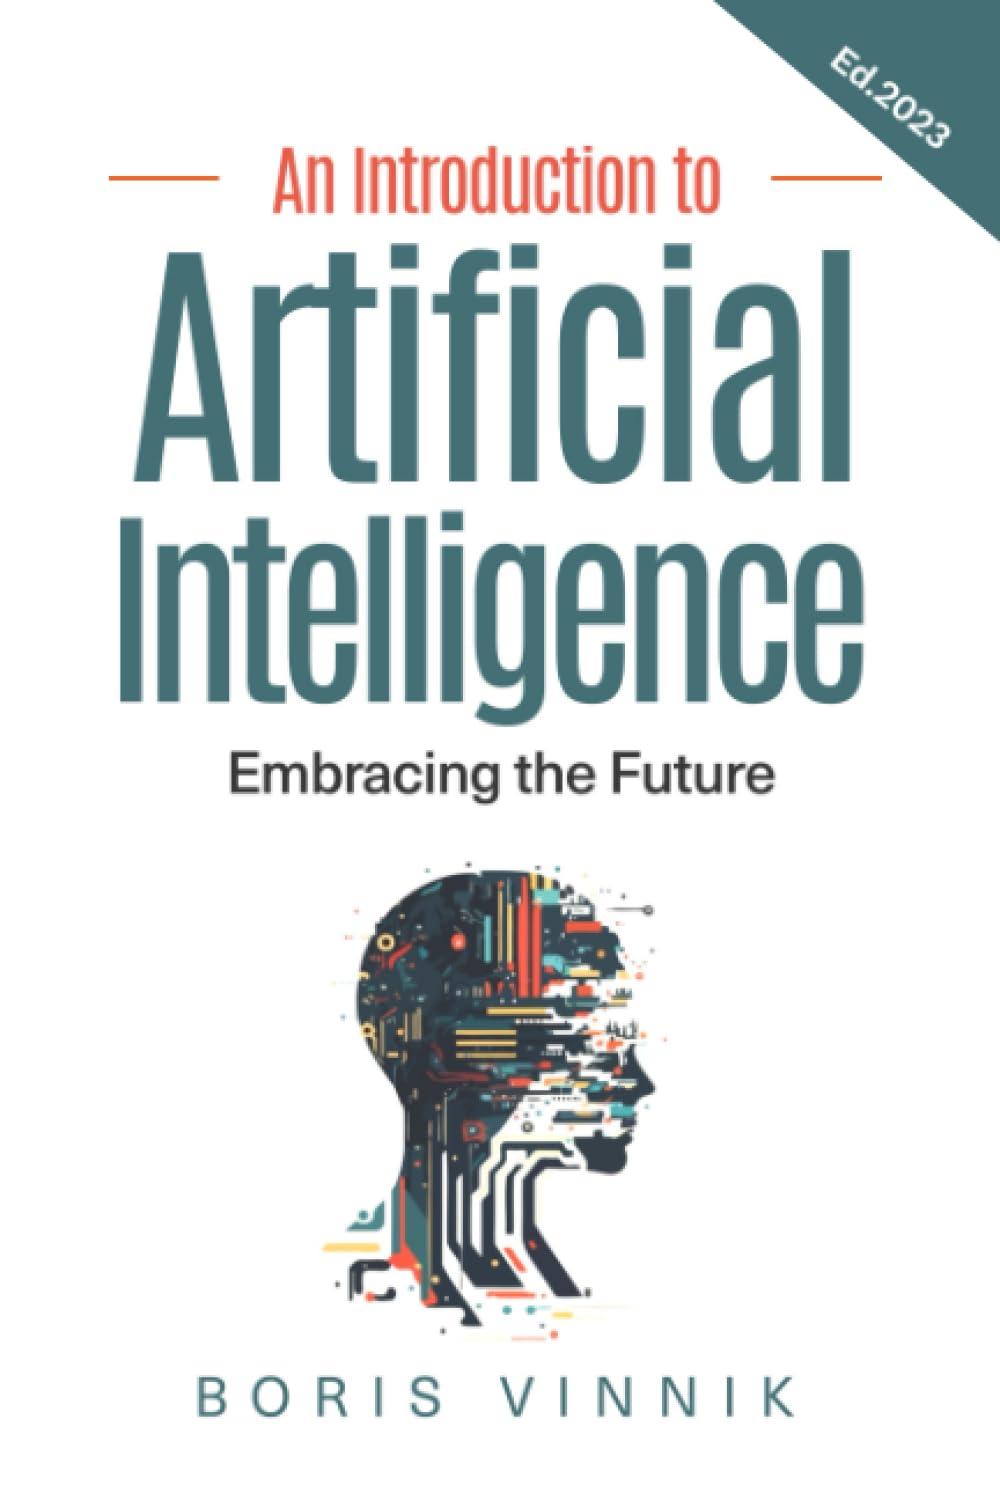 an introduction to artificial intelligence embracing the future 1st edition boris vinnik b0chlcpnrf,